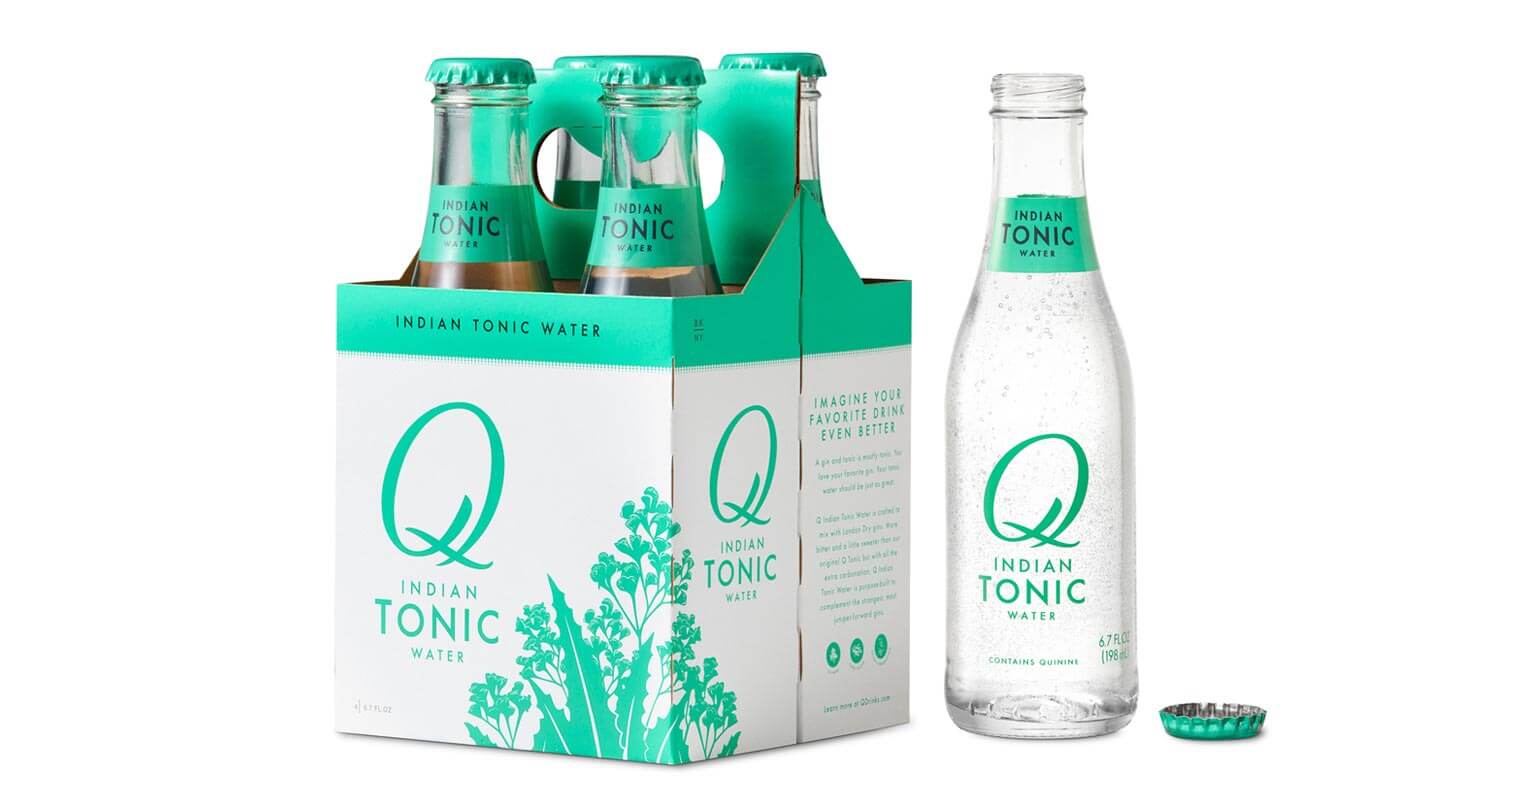 Q Drinks Launches Q Indian Tonic, featured image